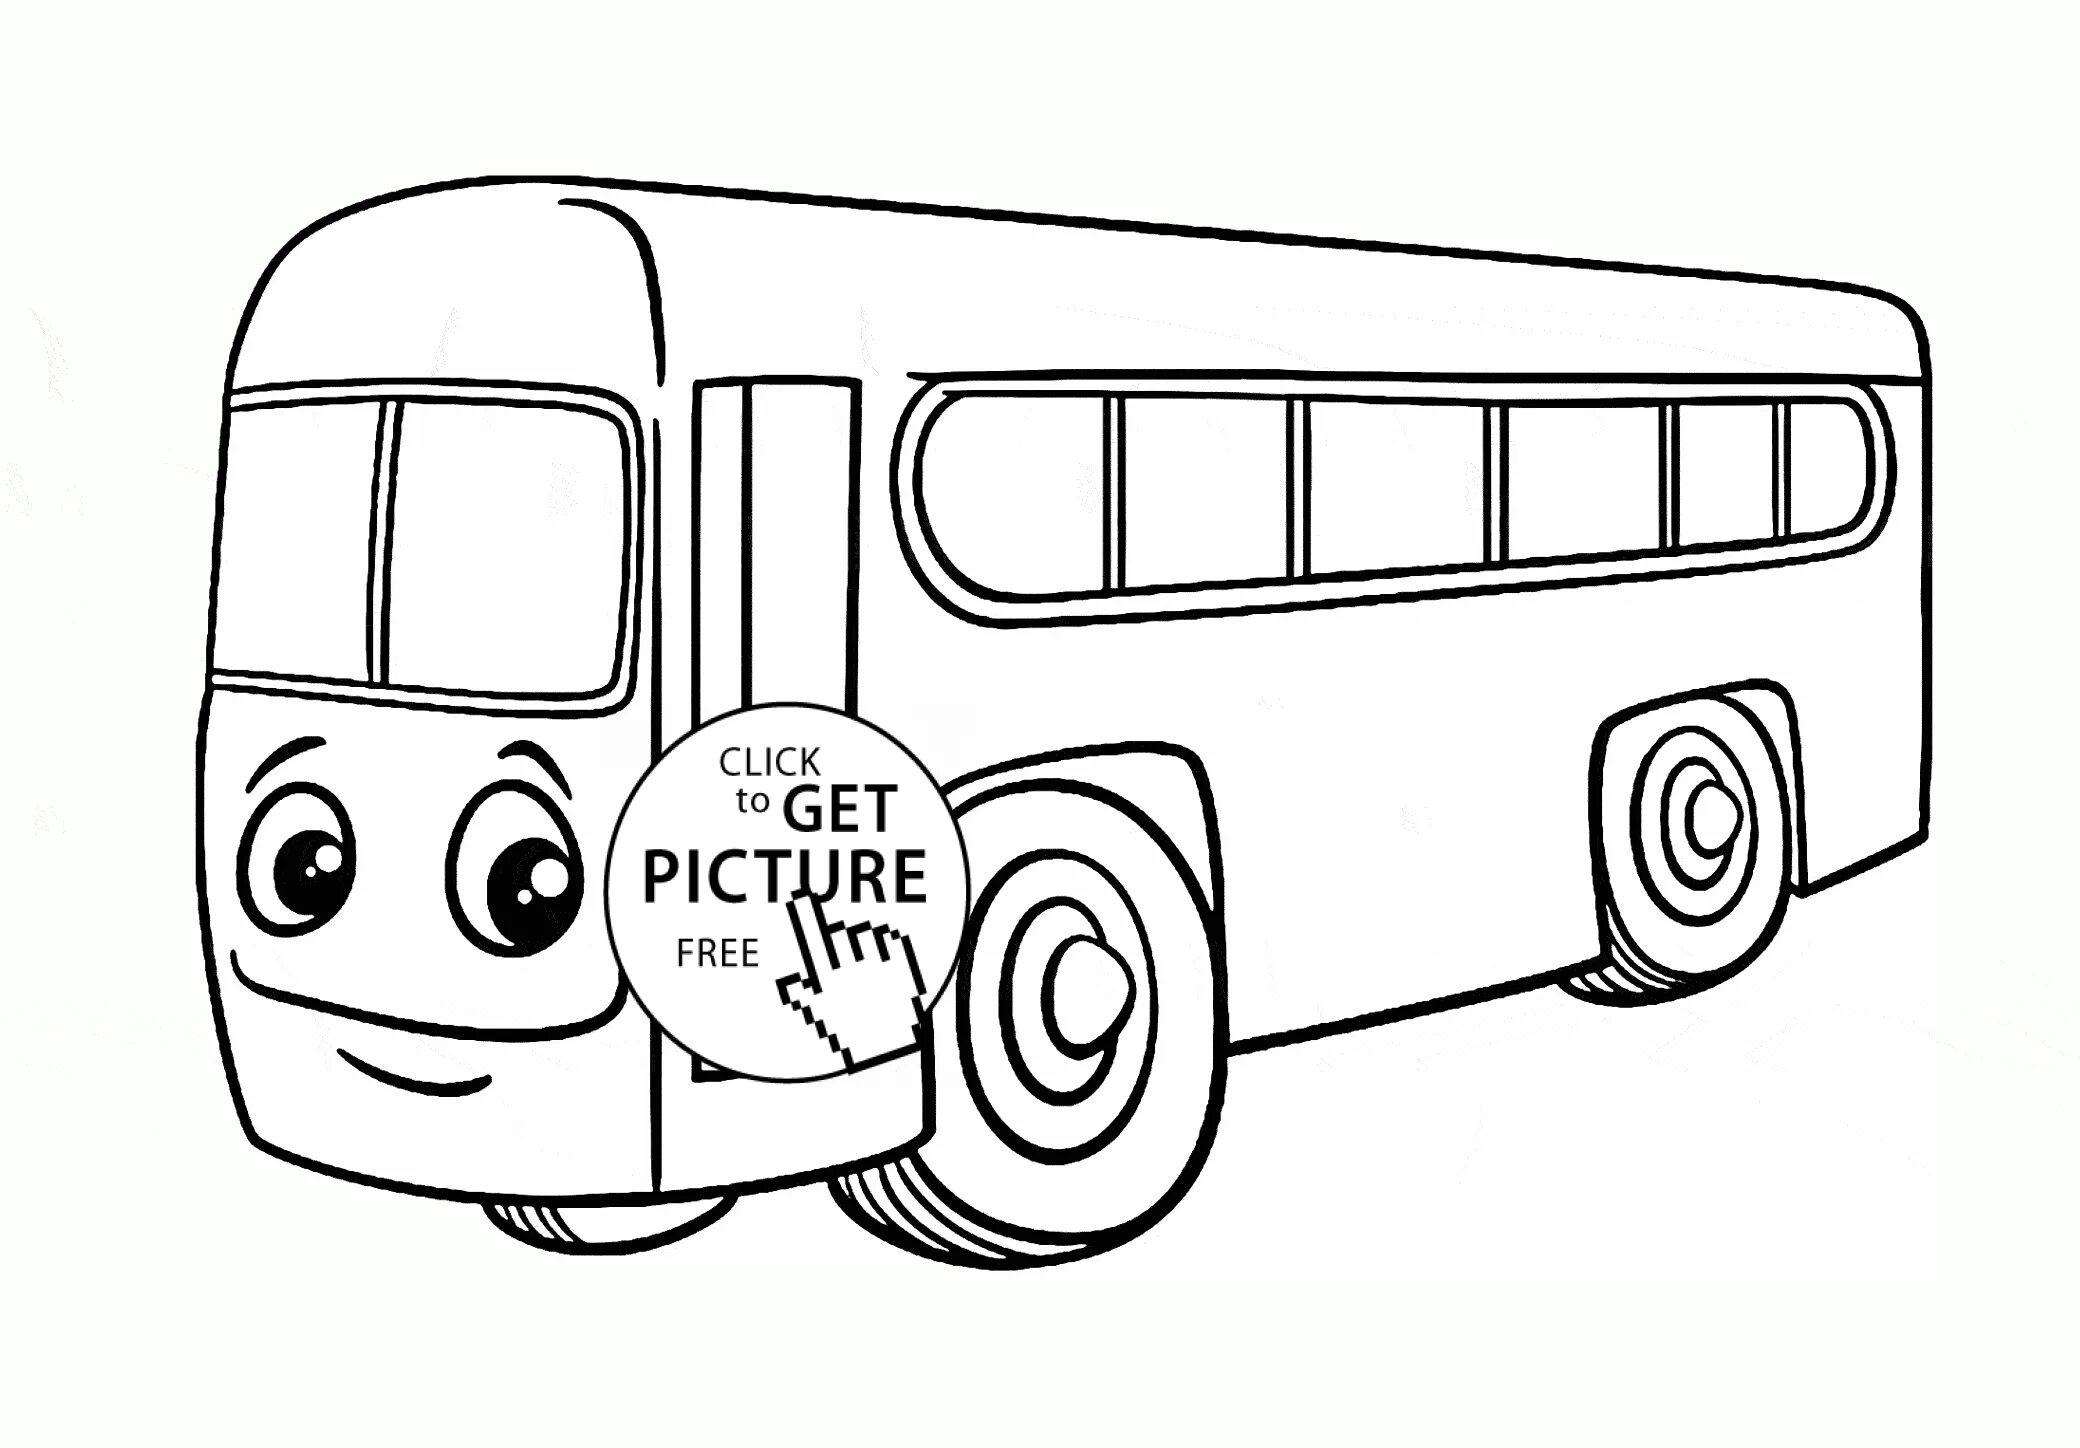 Exciting accordion bus coloring page